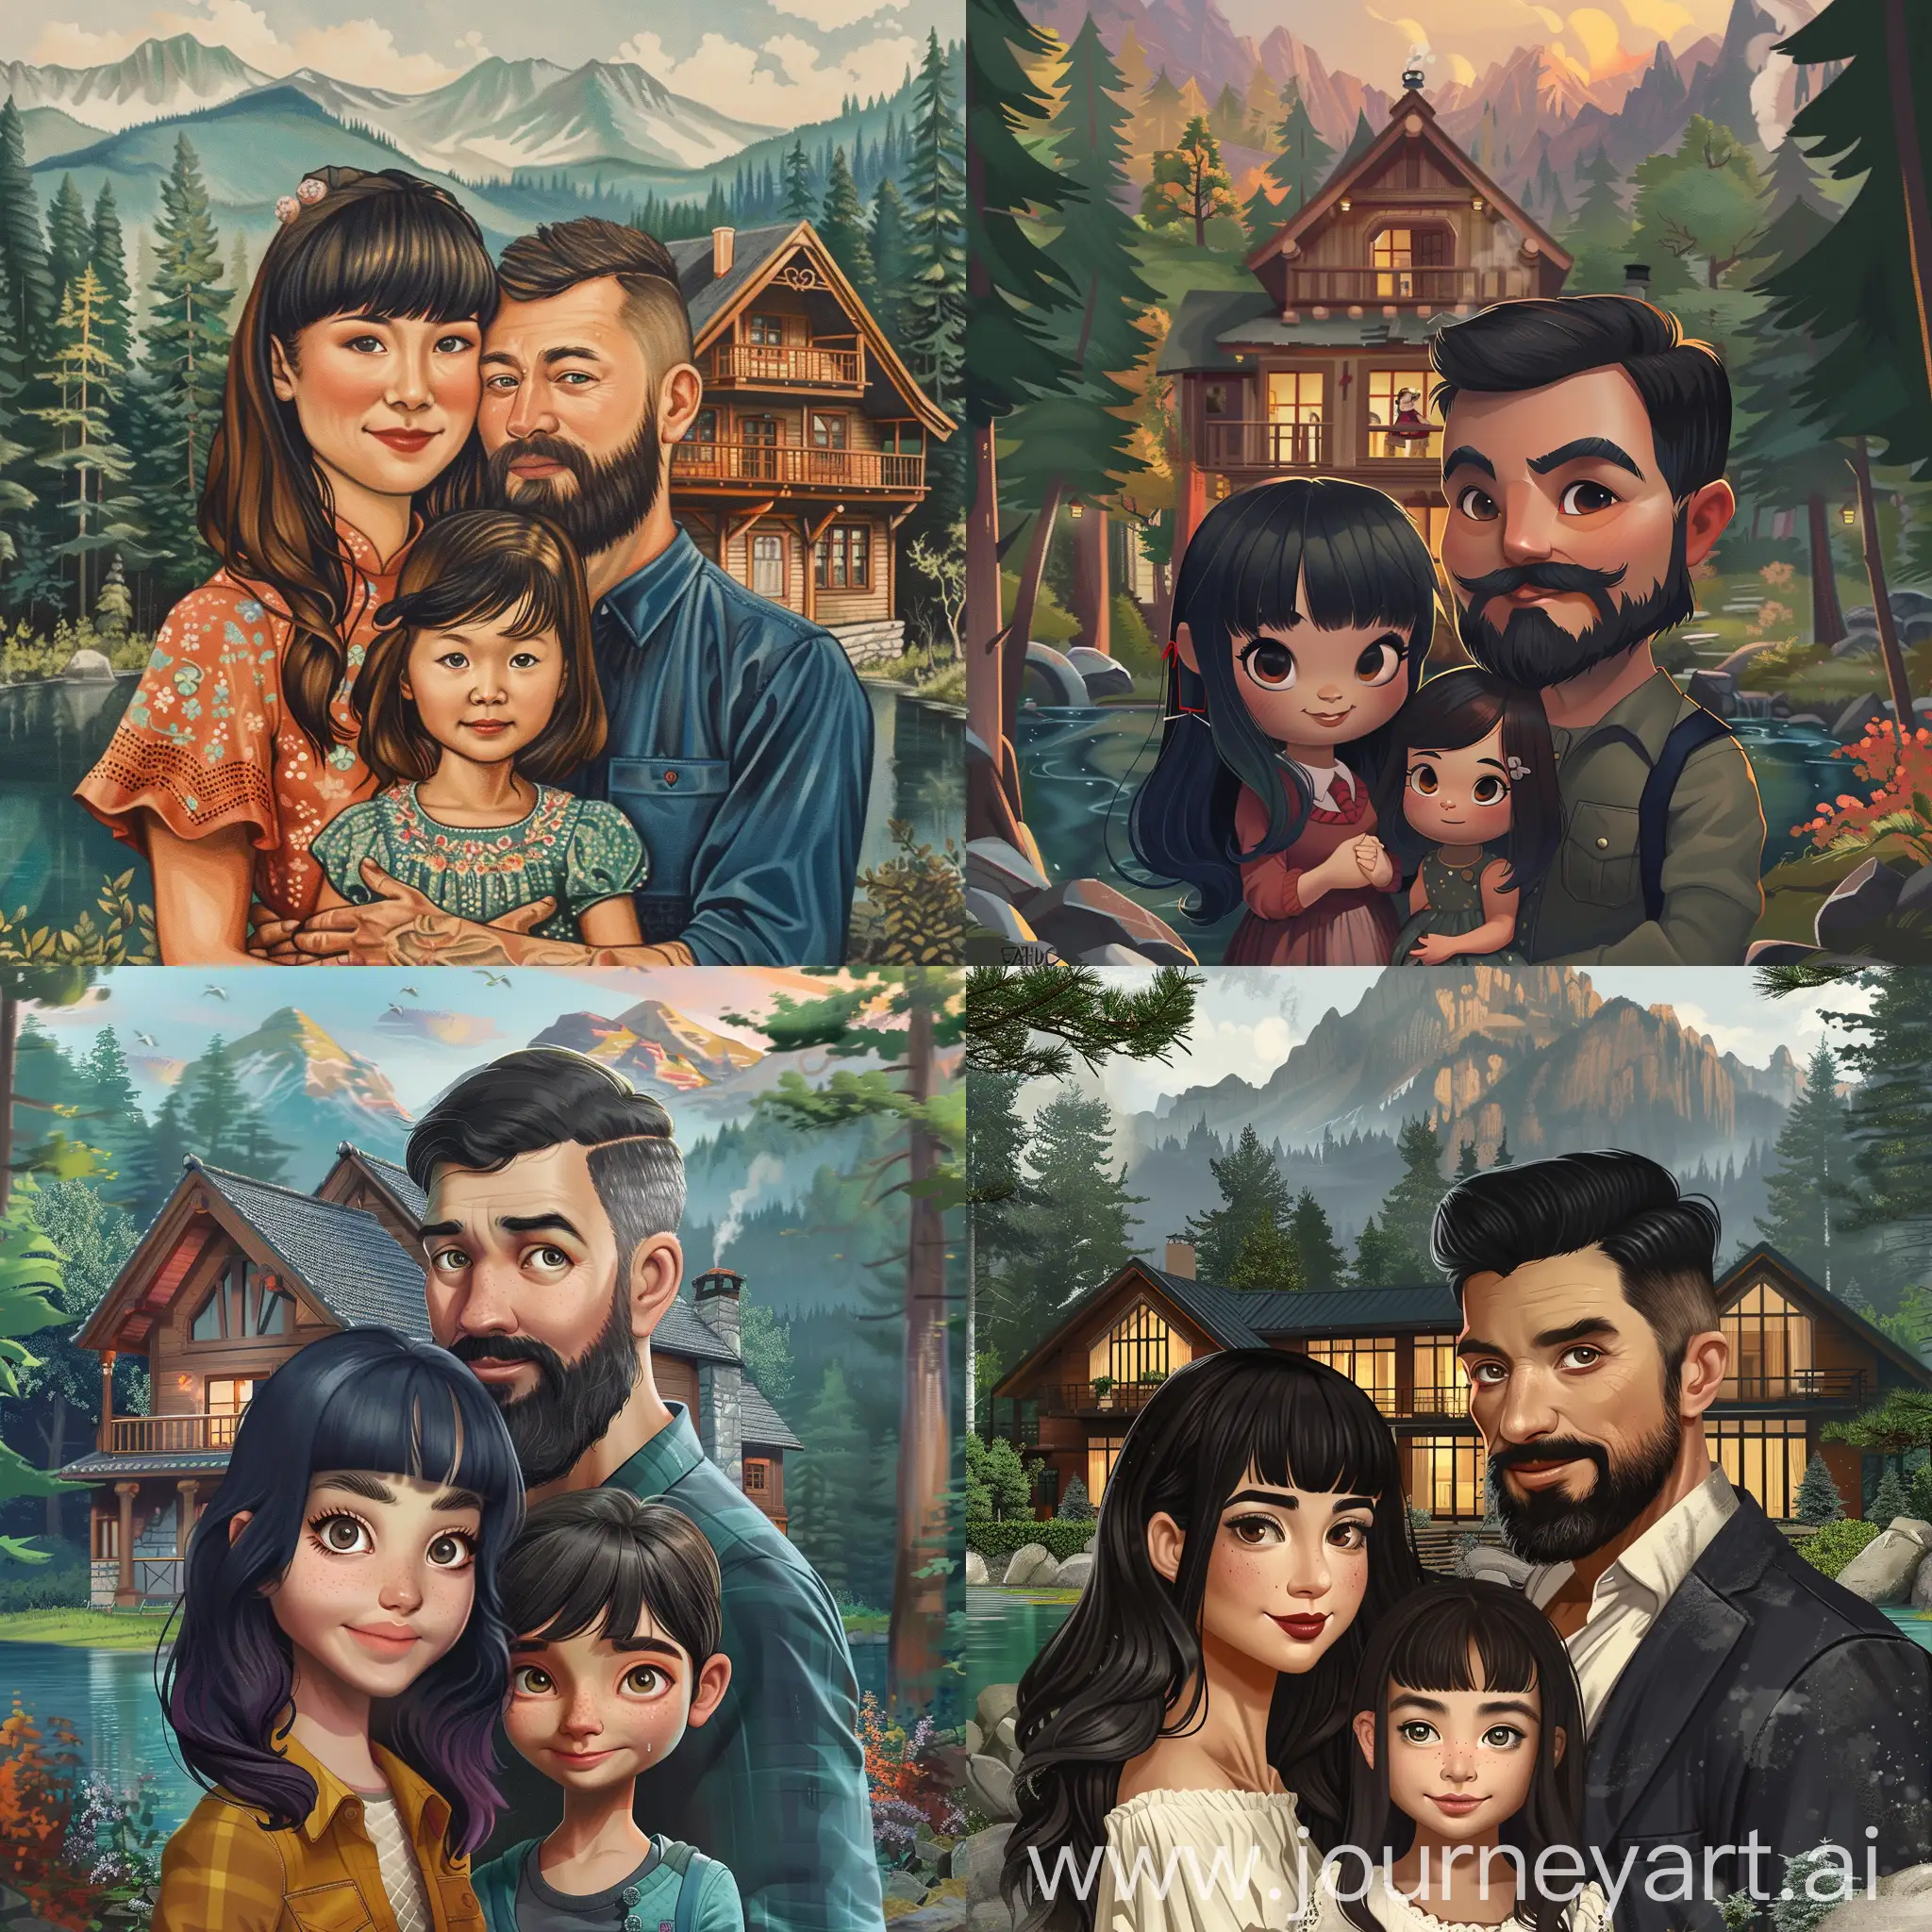 make me a picture of a kazakh asian girl with a bang and portuguese man with beard and moustache couple and their daughter in a beautiful house near the forest and lake